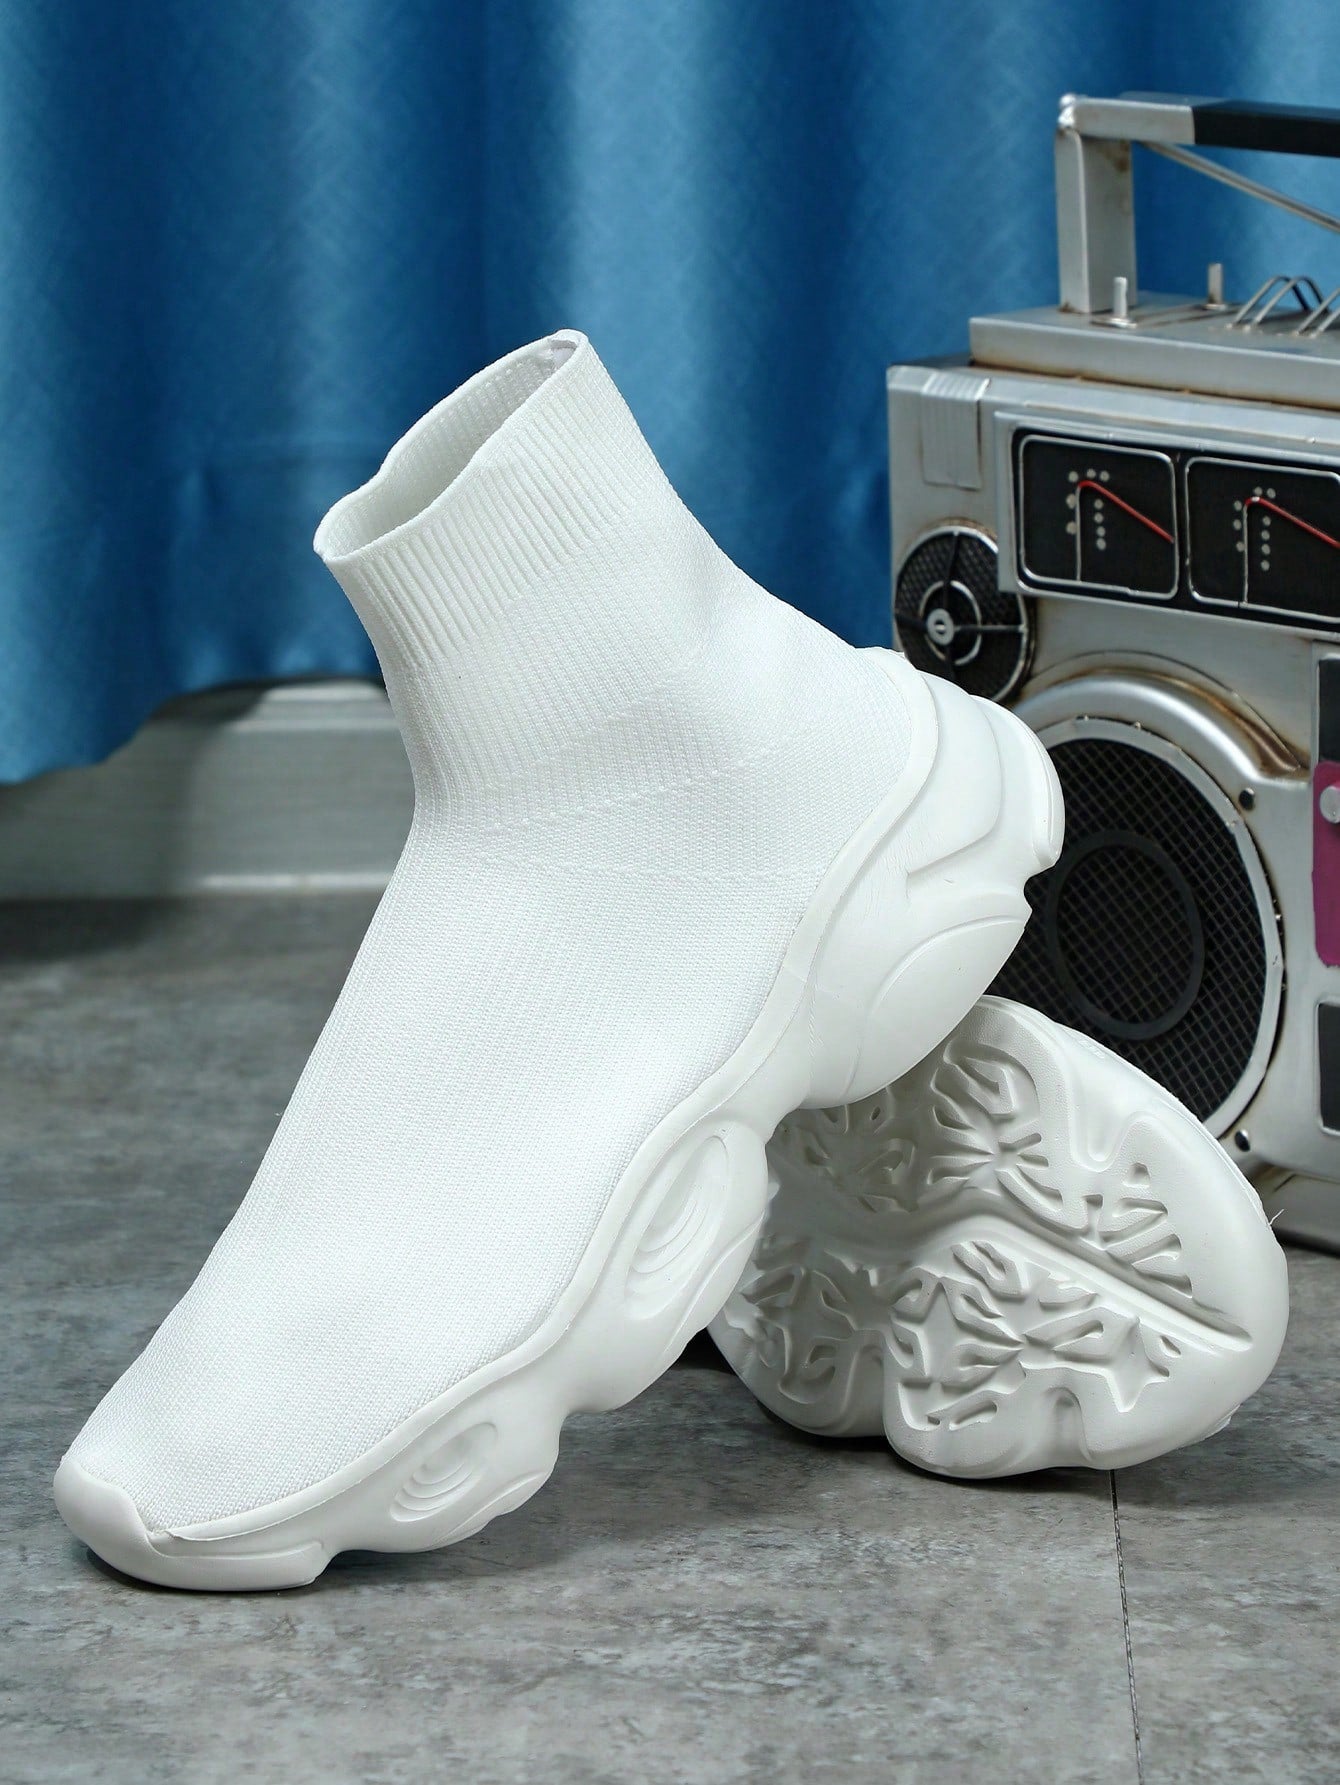 White Soft & Light Unisex Sock Shoes For Men & Women, Suitable For Casual, Walking, School, And Gift